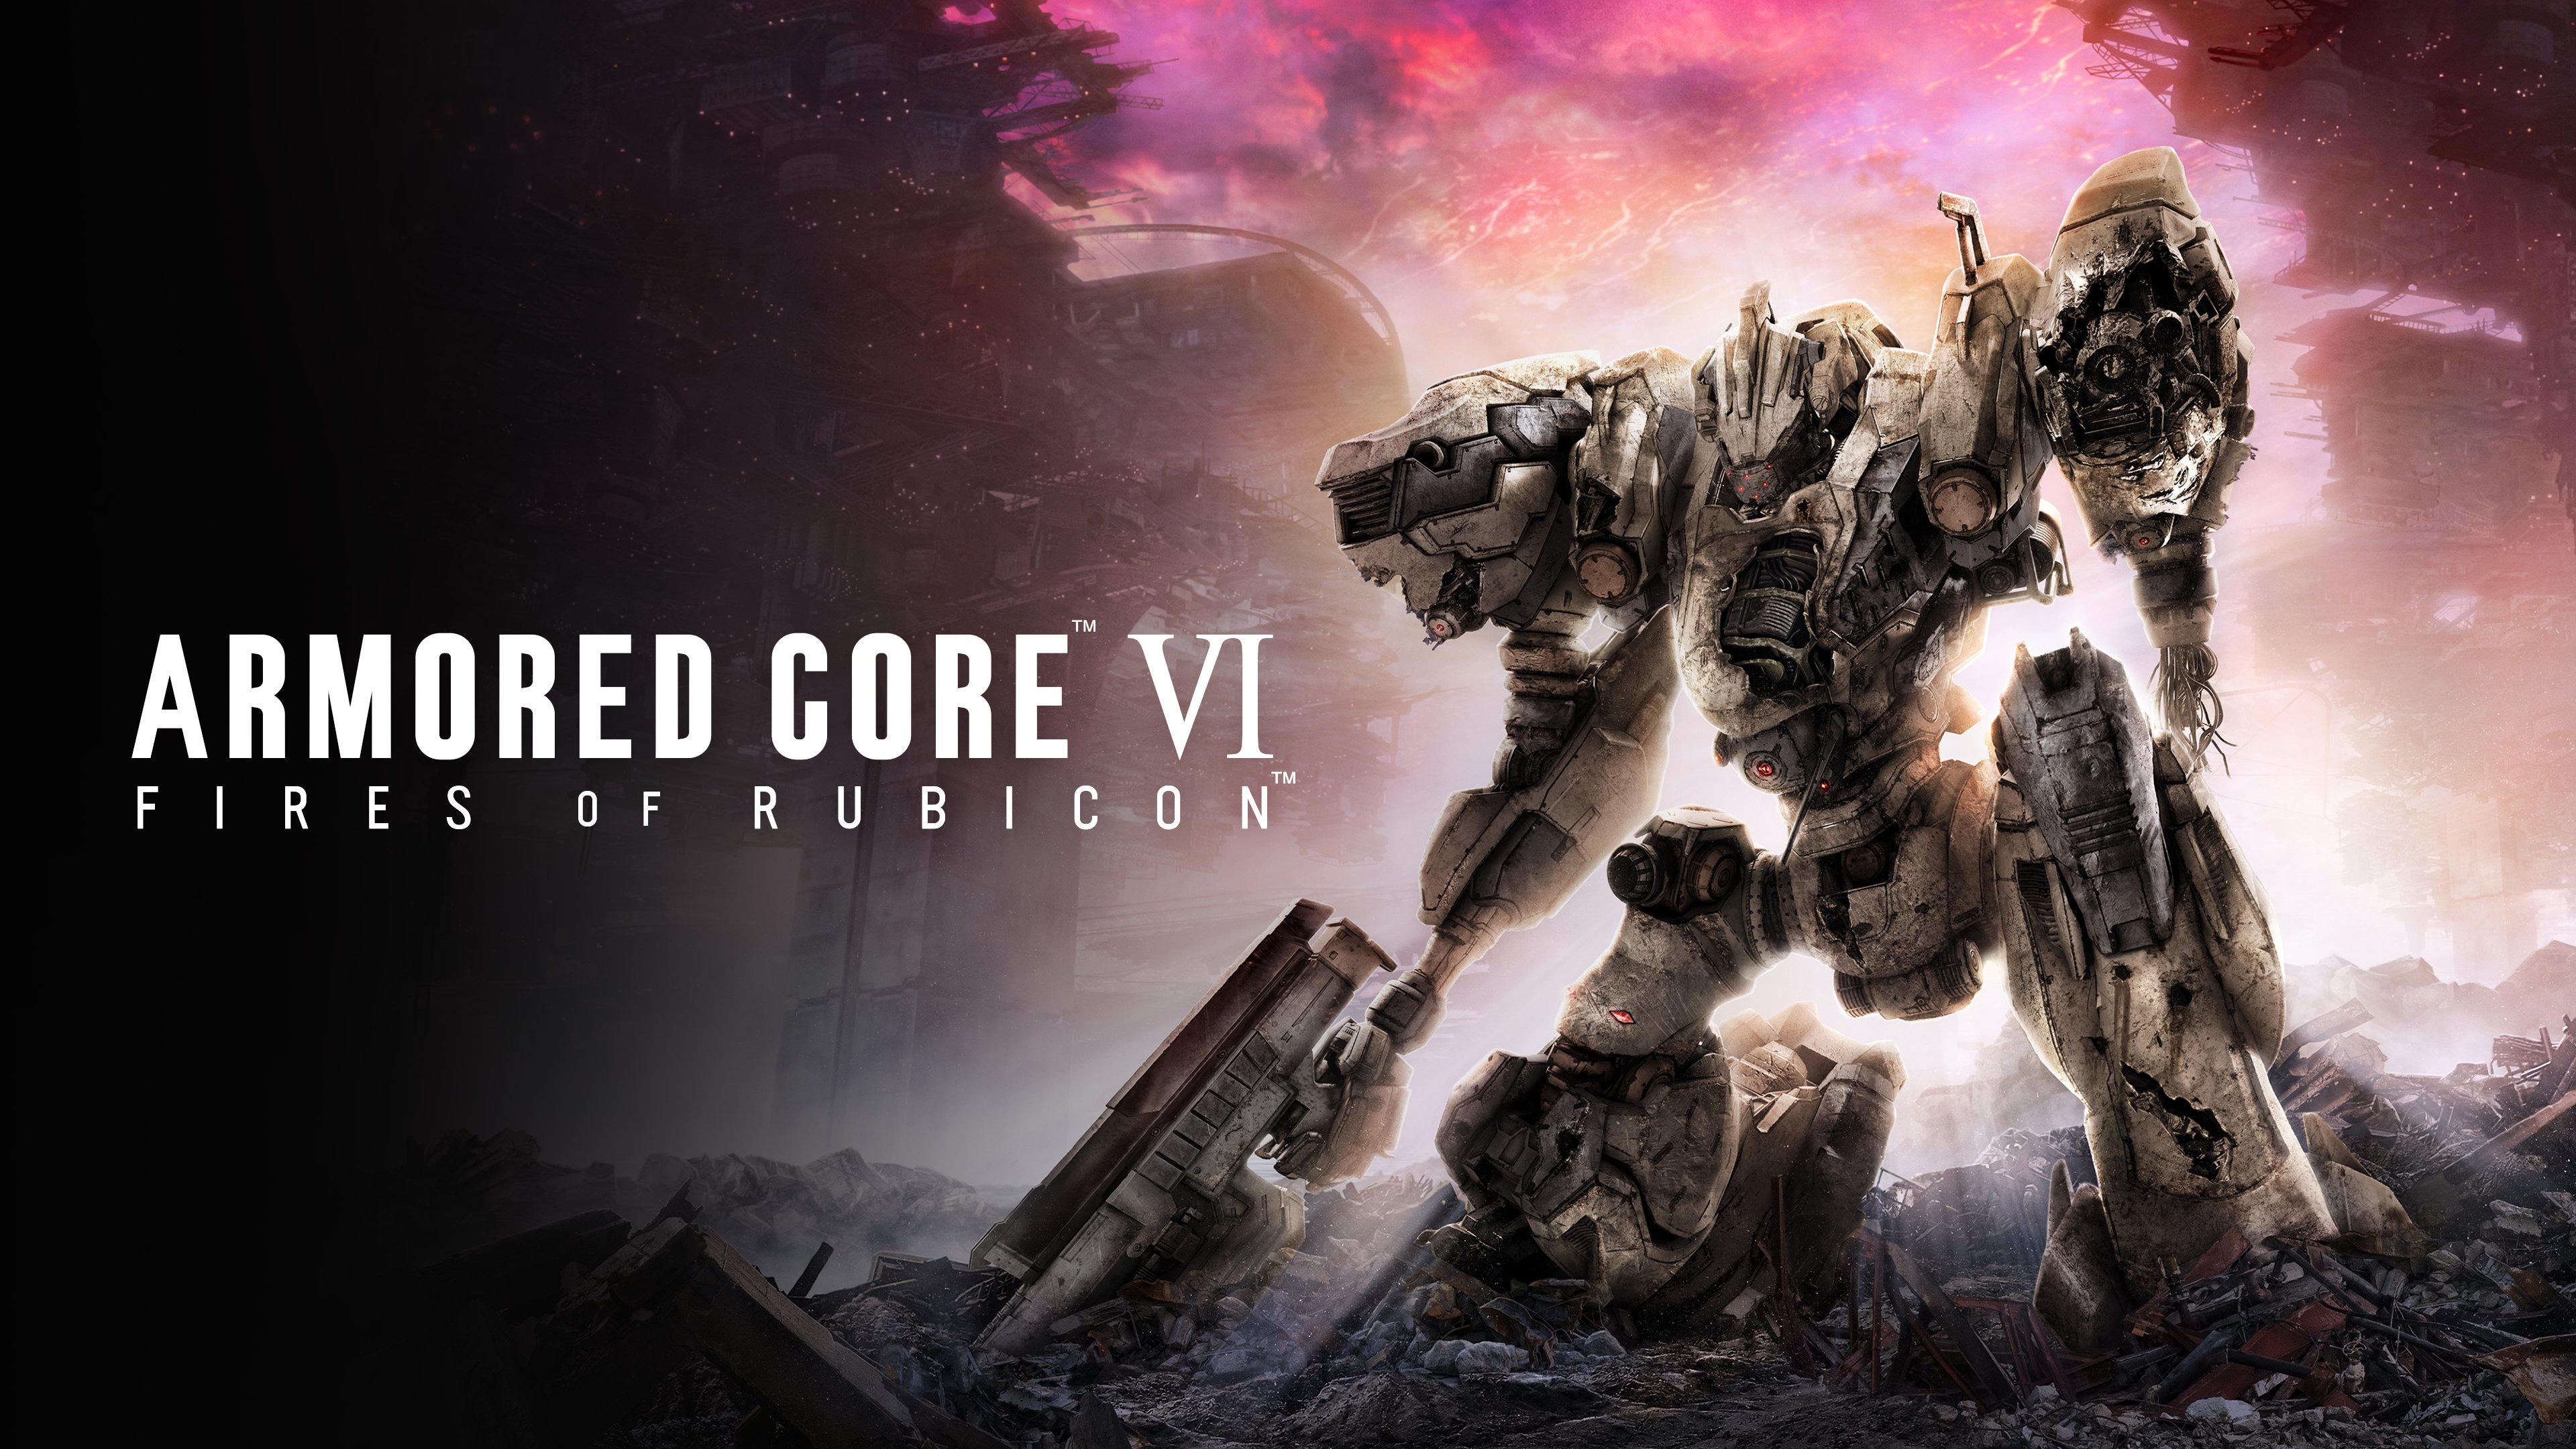 ARMORED CORE VI FIRES OF RUBICON発売日が日に決定！ PS Sto ...